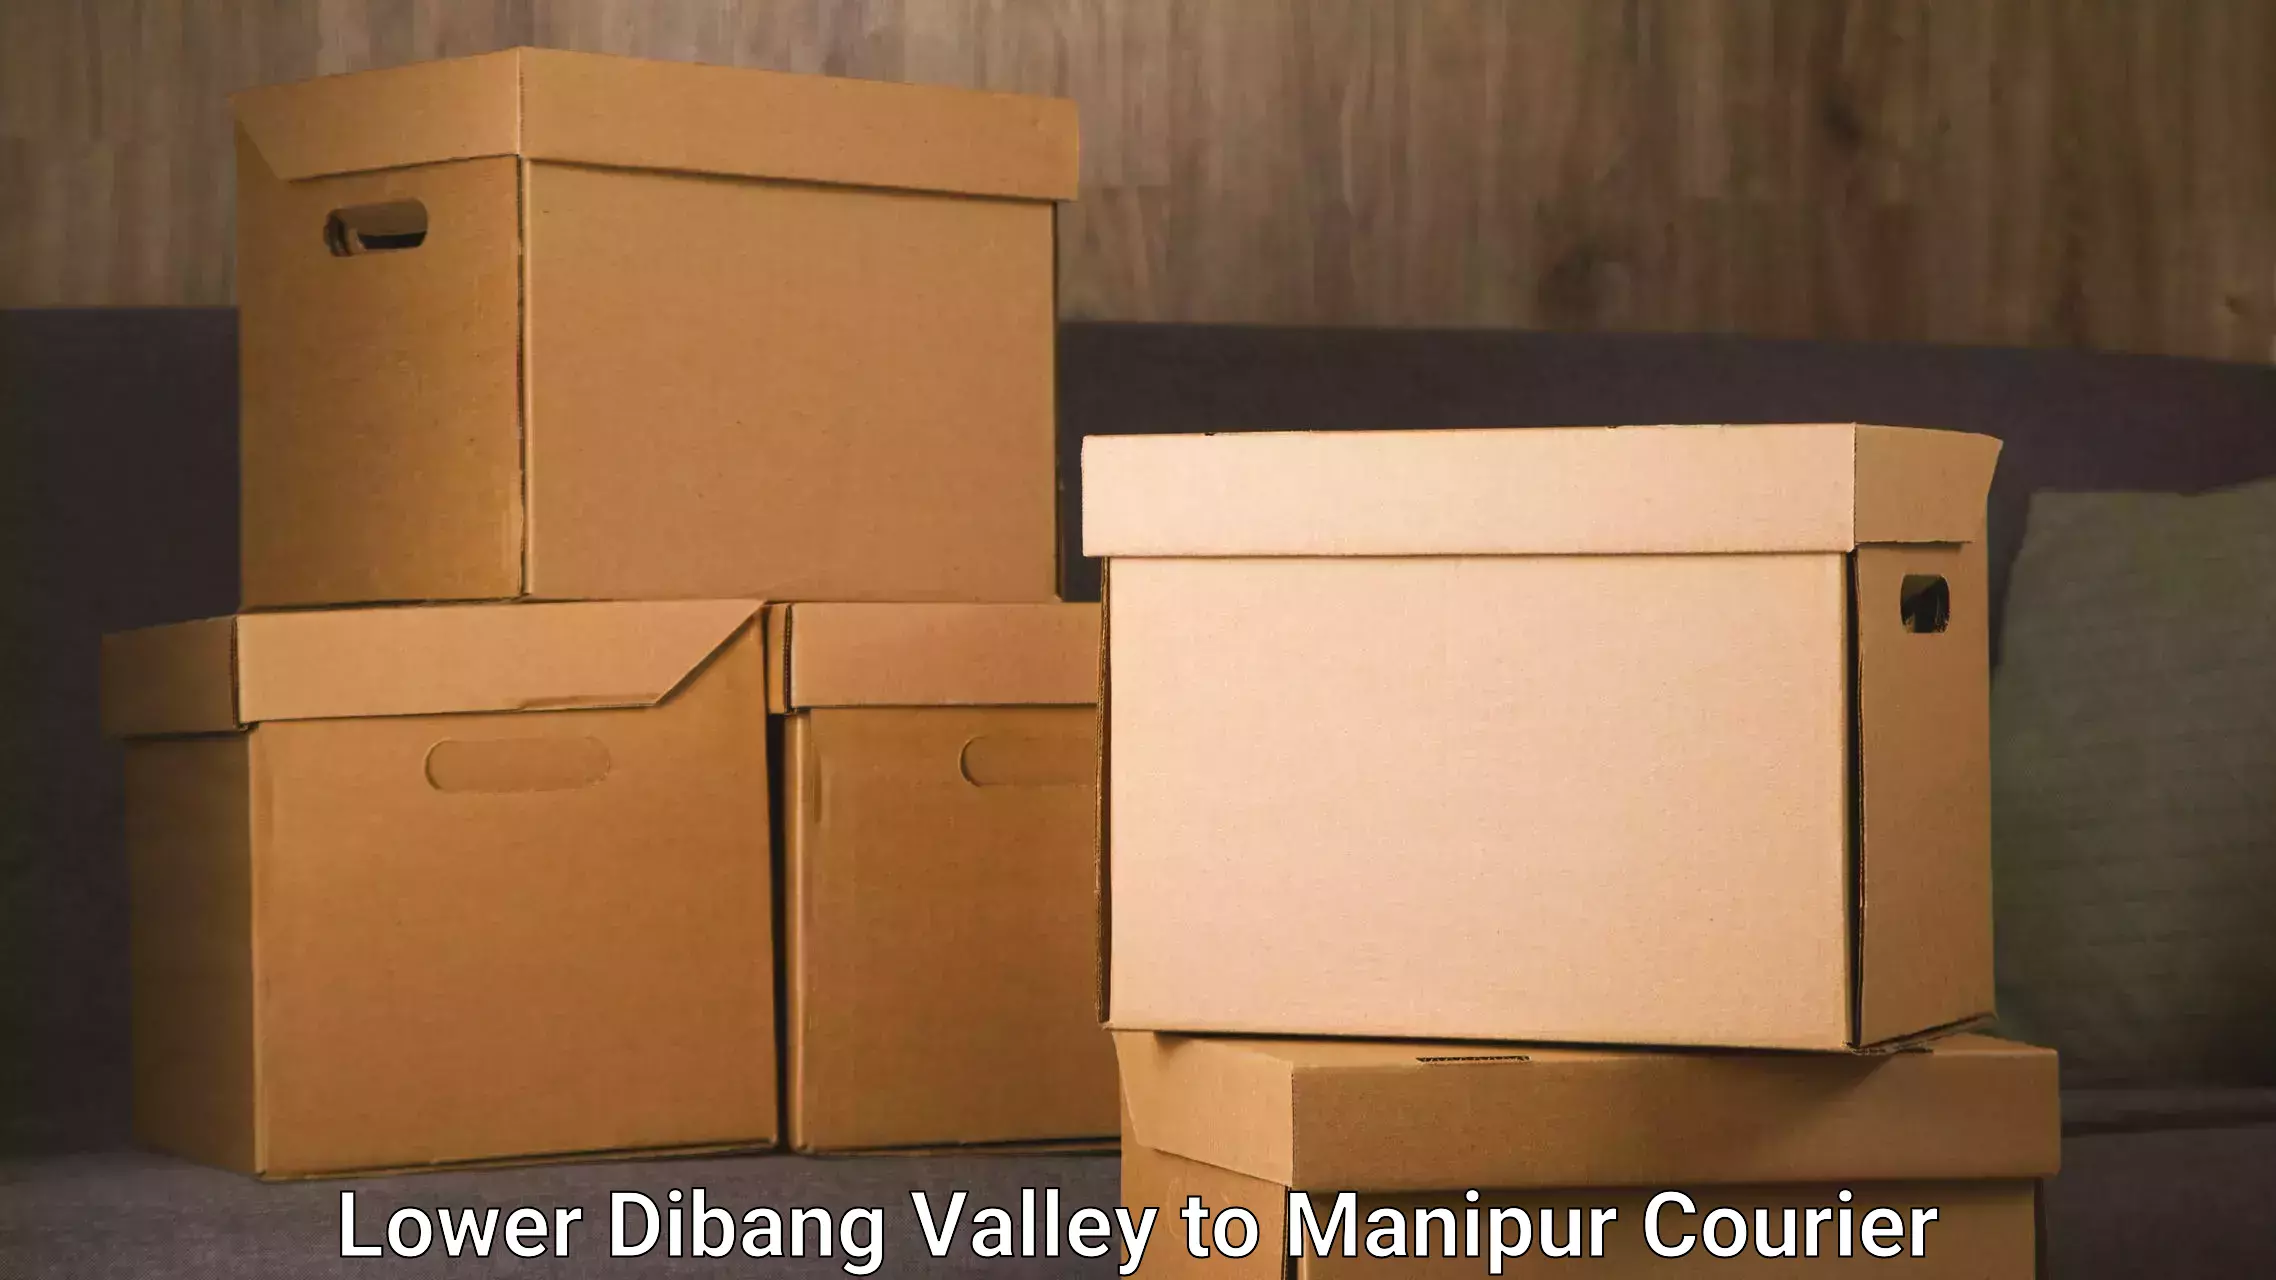 Courier service comparison in Lower Dibang Valley to Moirang